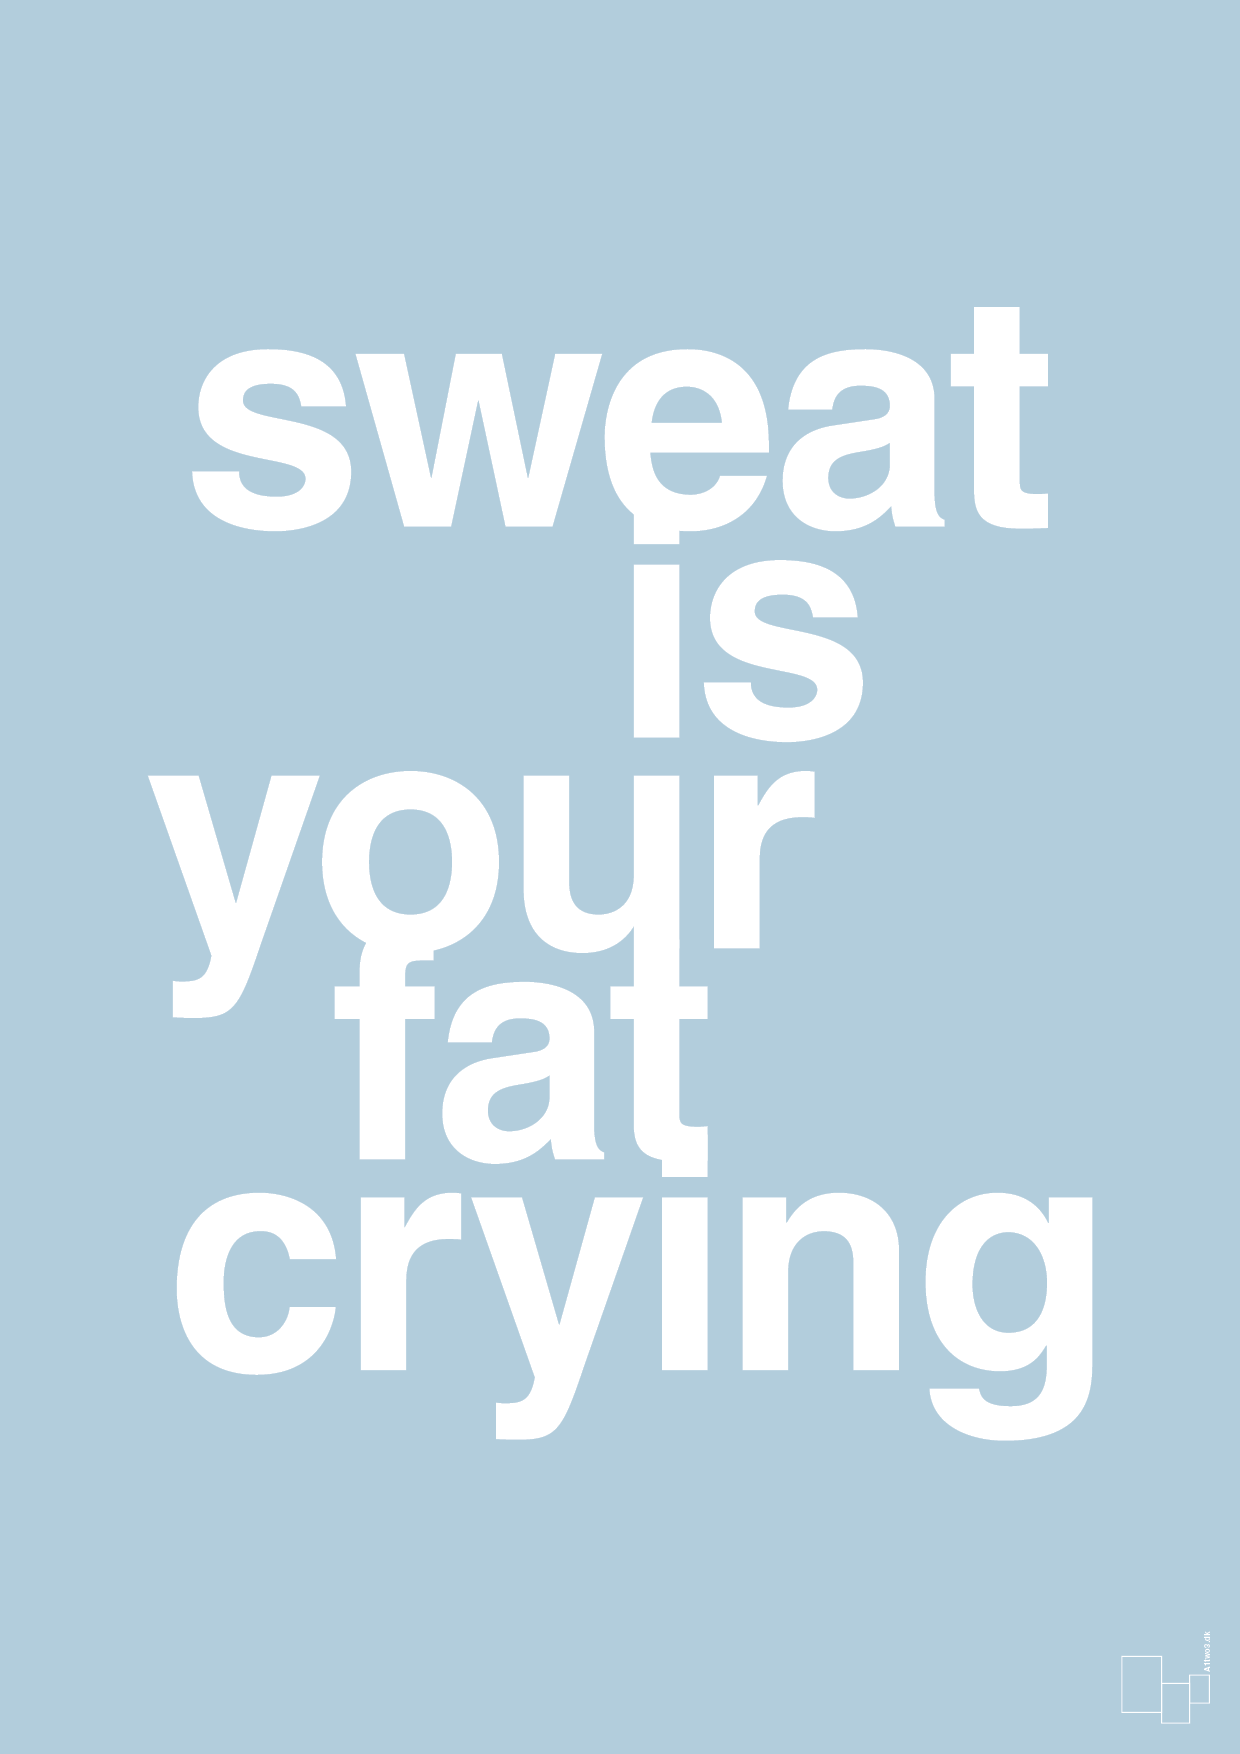 sweat is your fat crying - Plakat med Sport & Fritid i Heavenly Blue